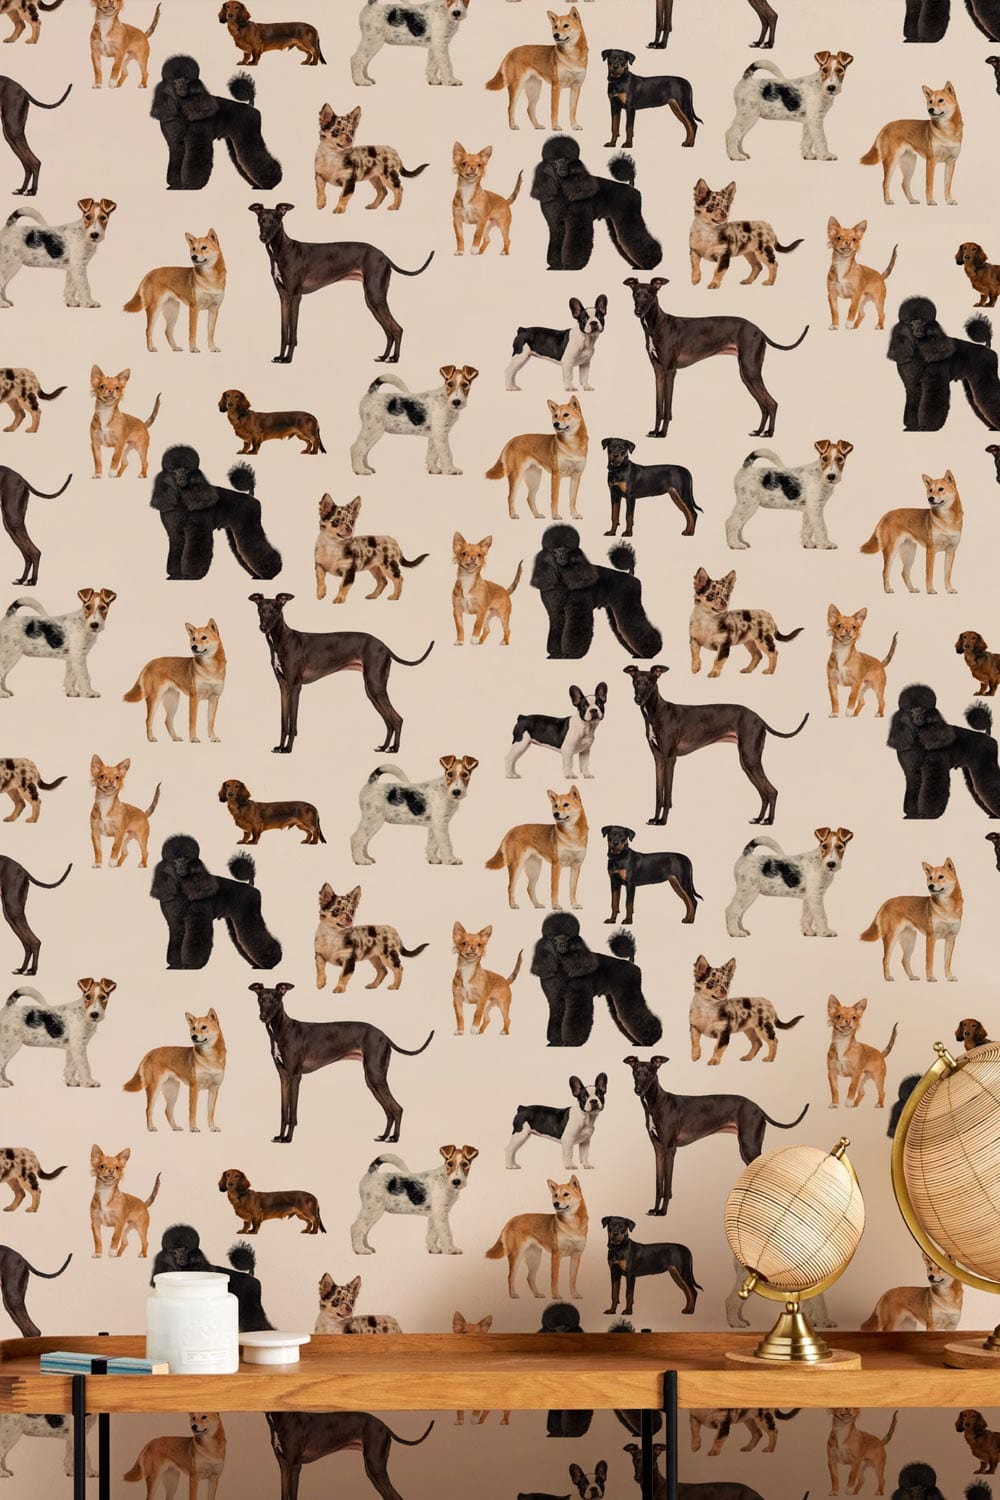 murals of cute dogs in repeating patterns for the hallway